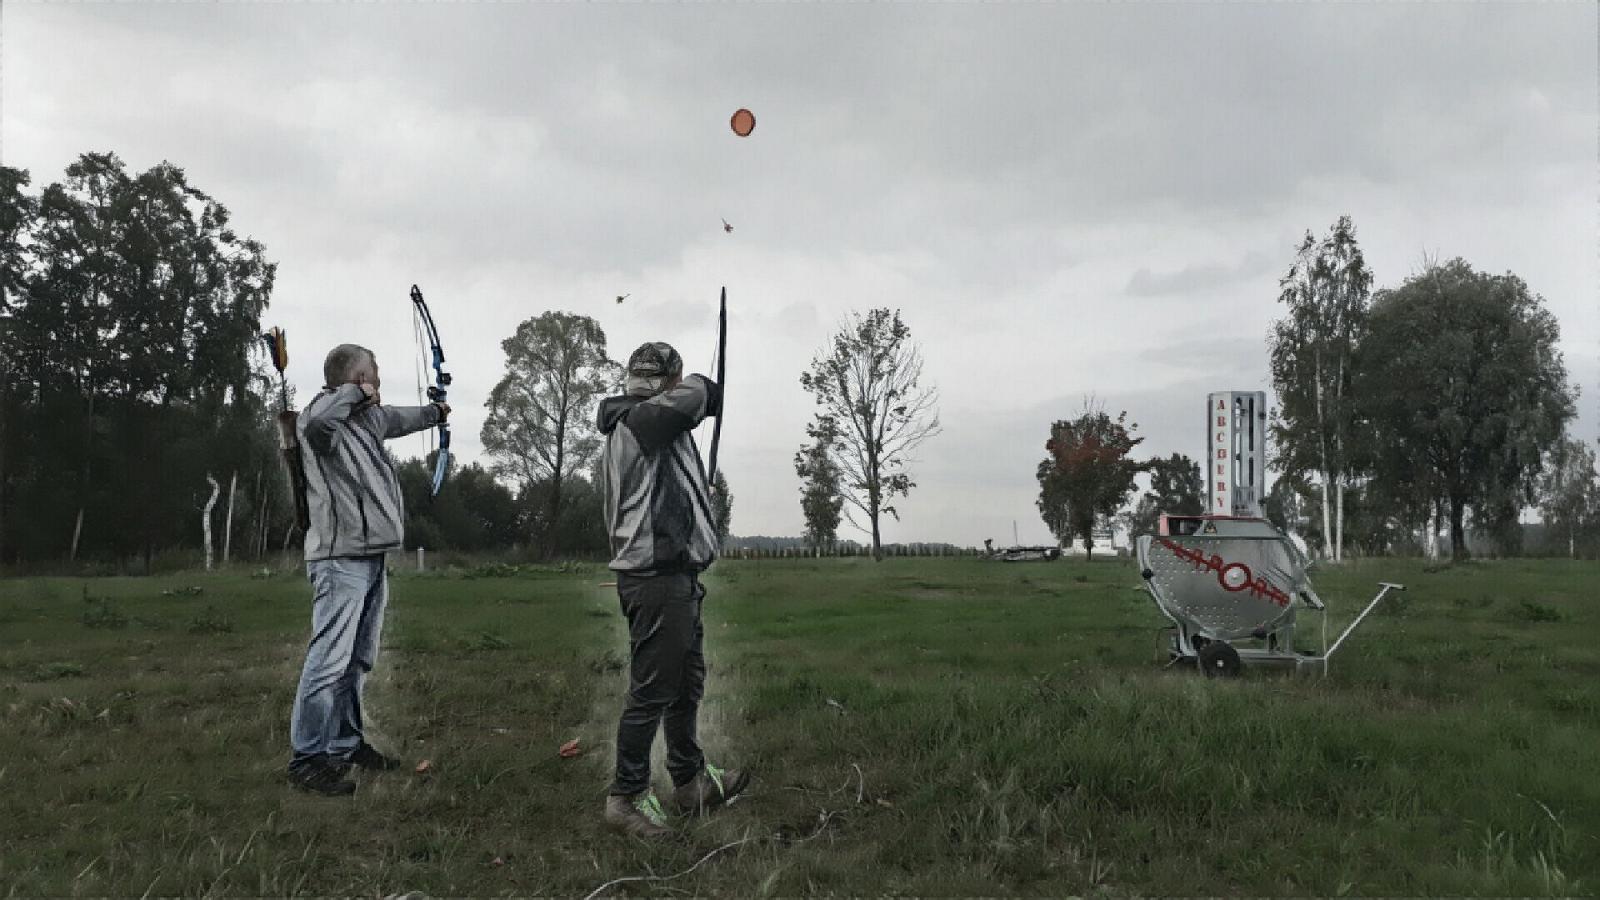 Archery with a moving target